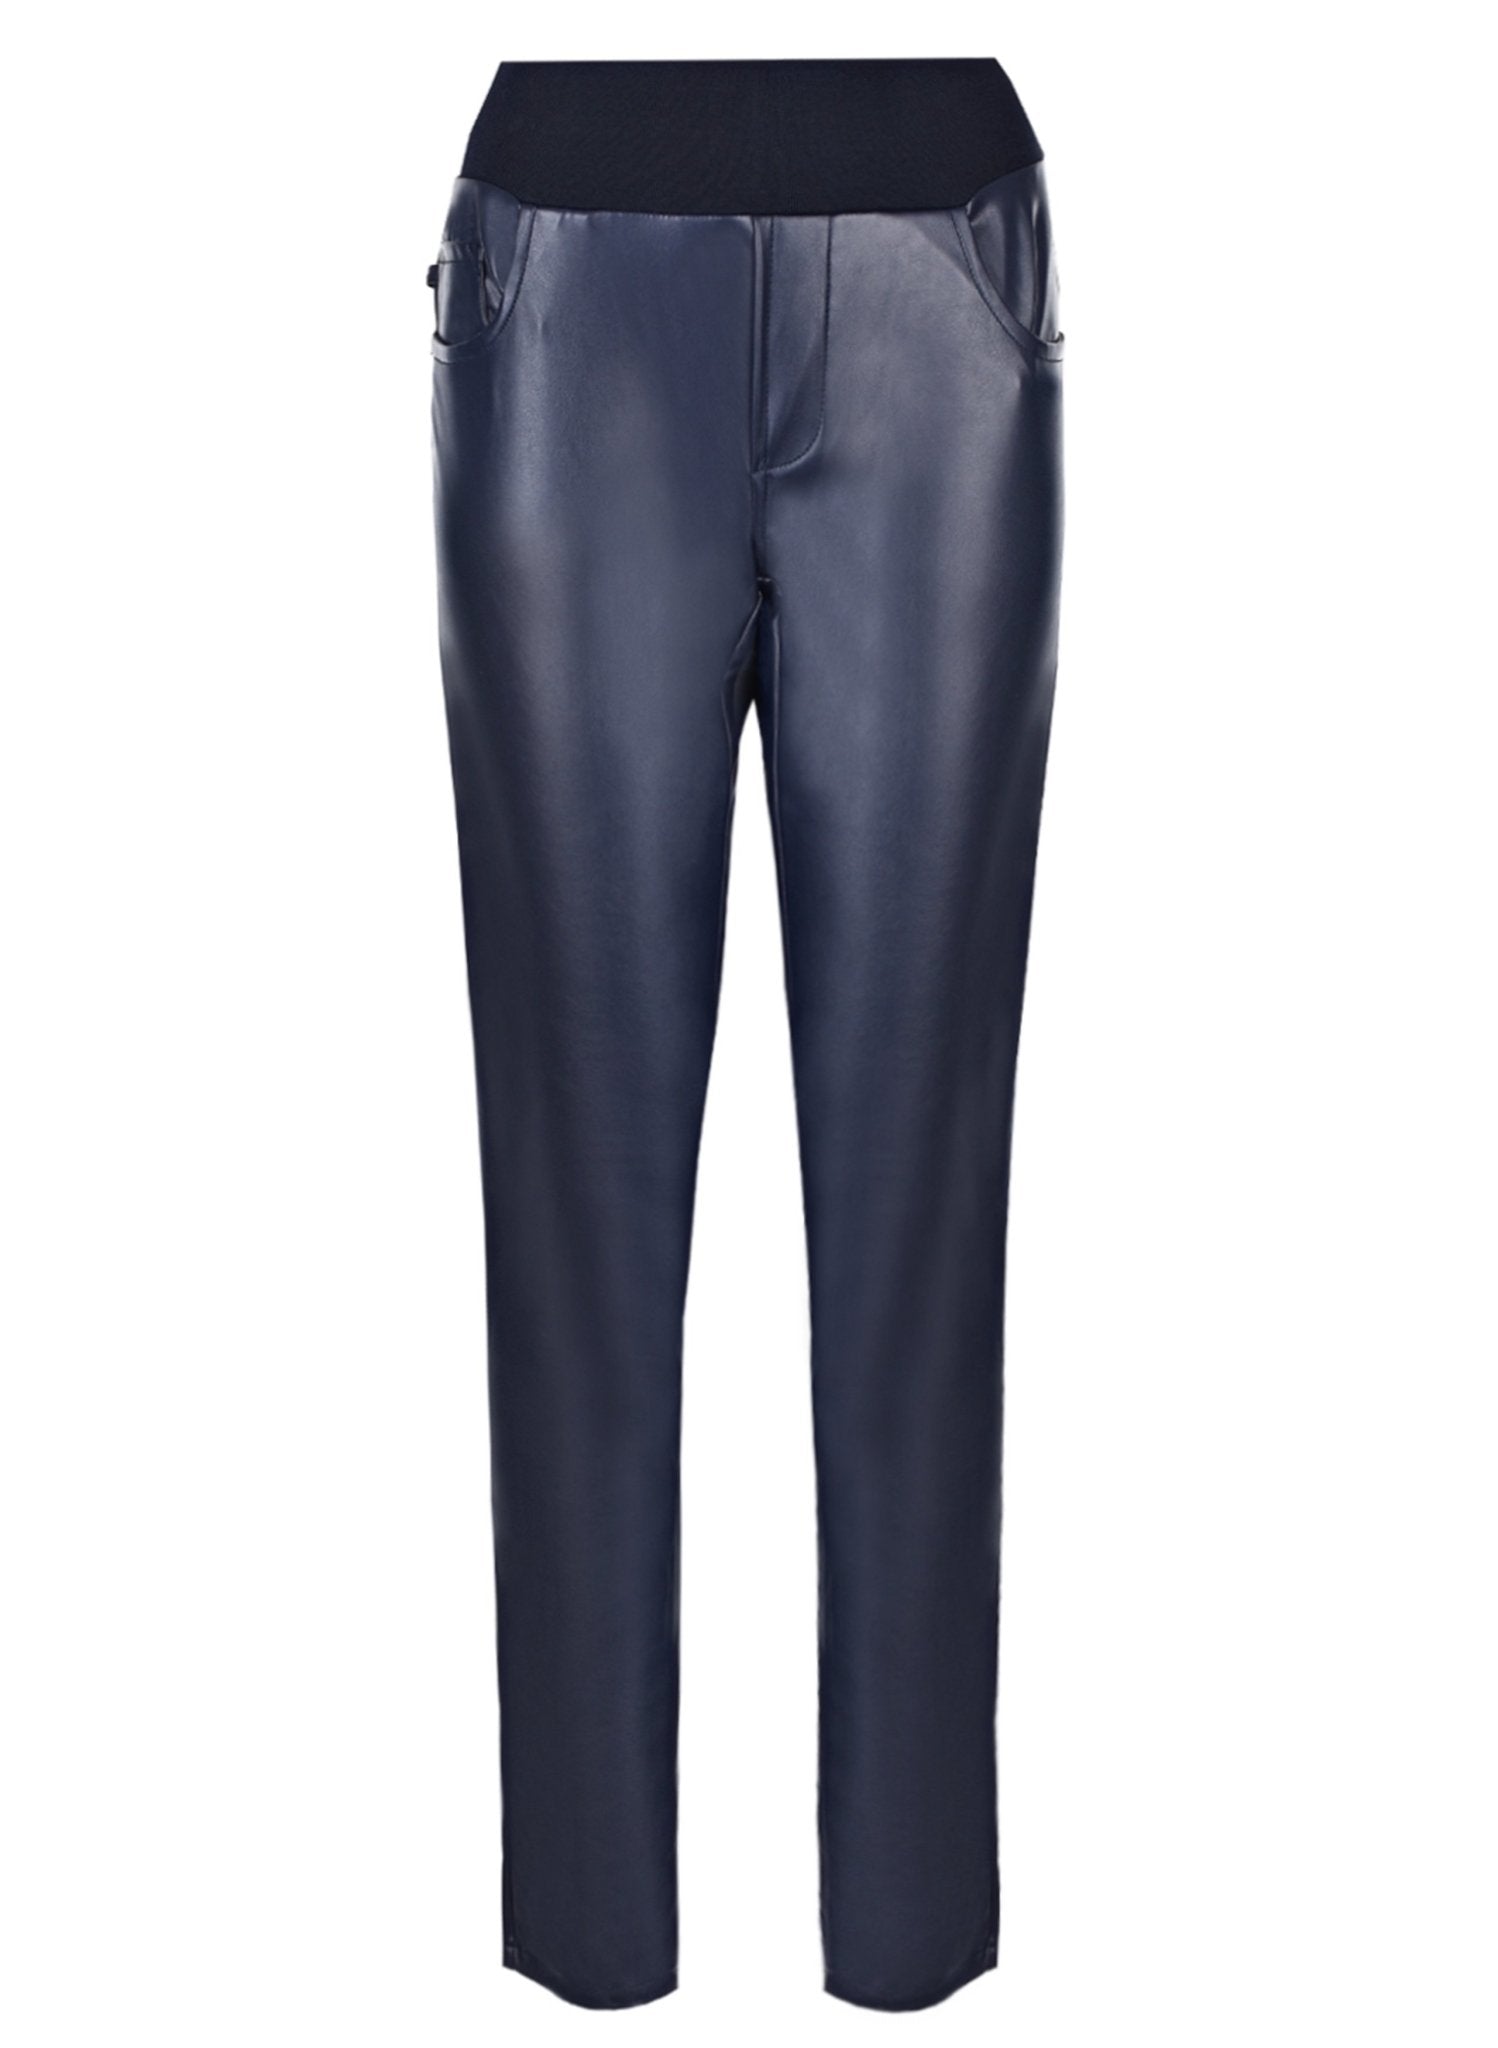 Ultra Skinny Leather Maternity Pants - Blue - Mums and Bumps